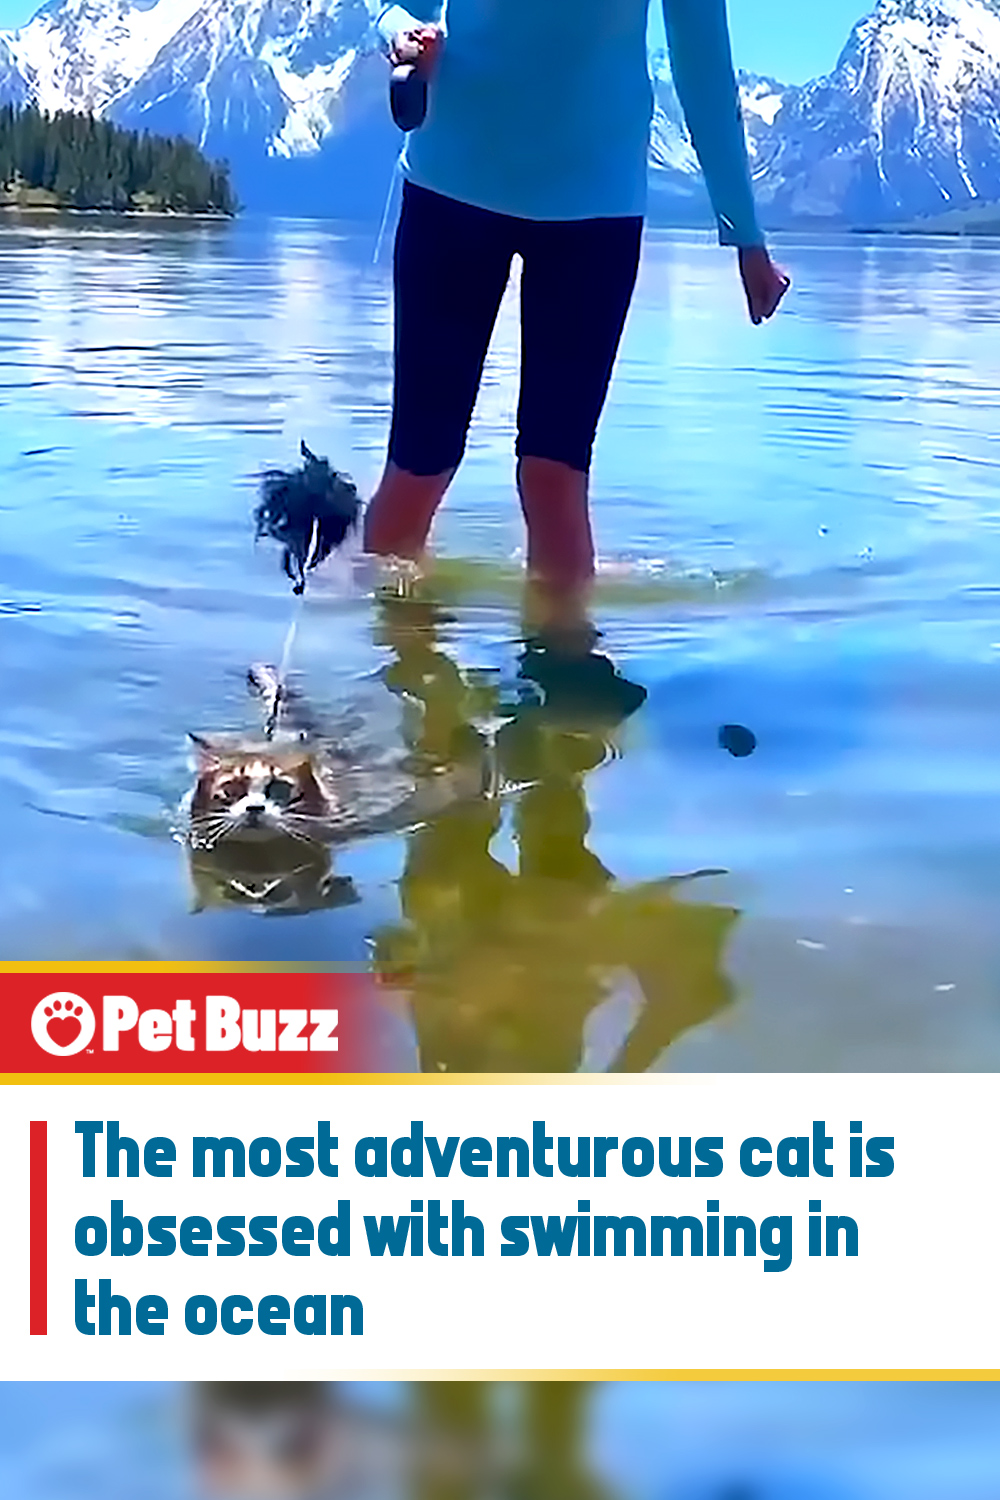 The most adventurous cat is obsessed with swimming in the ocean